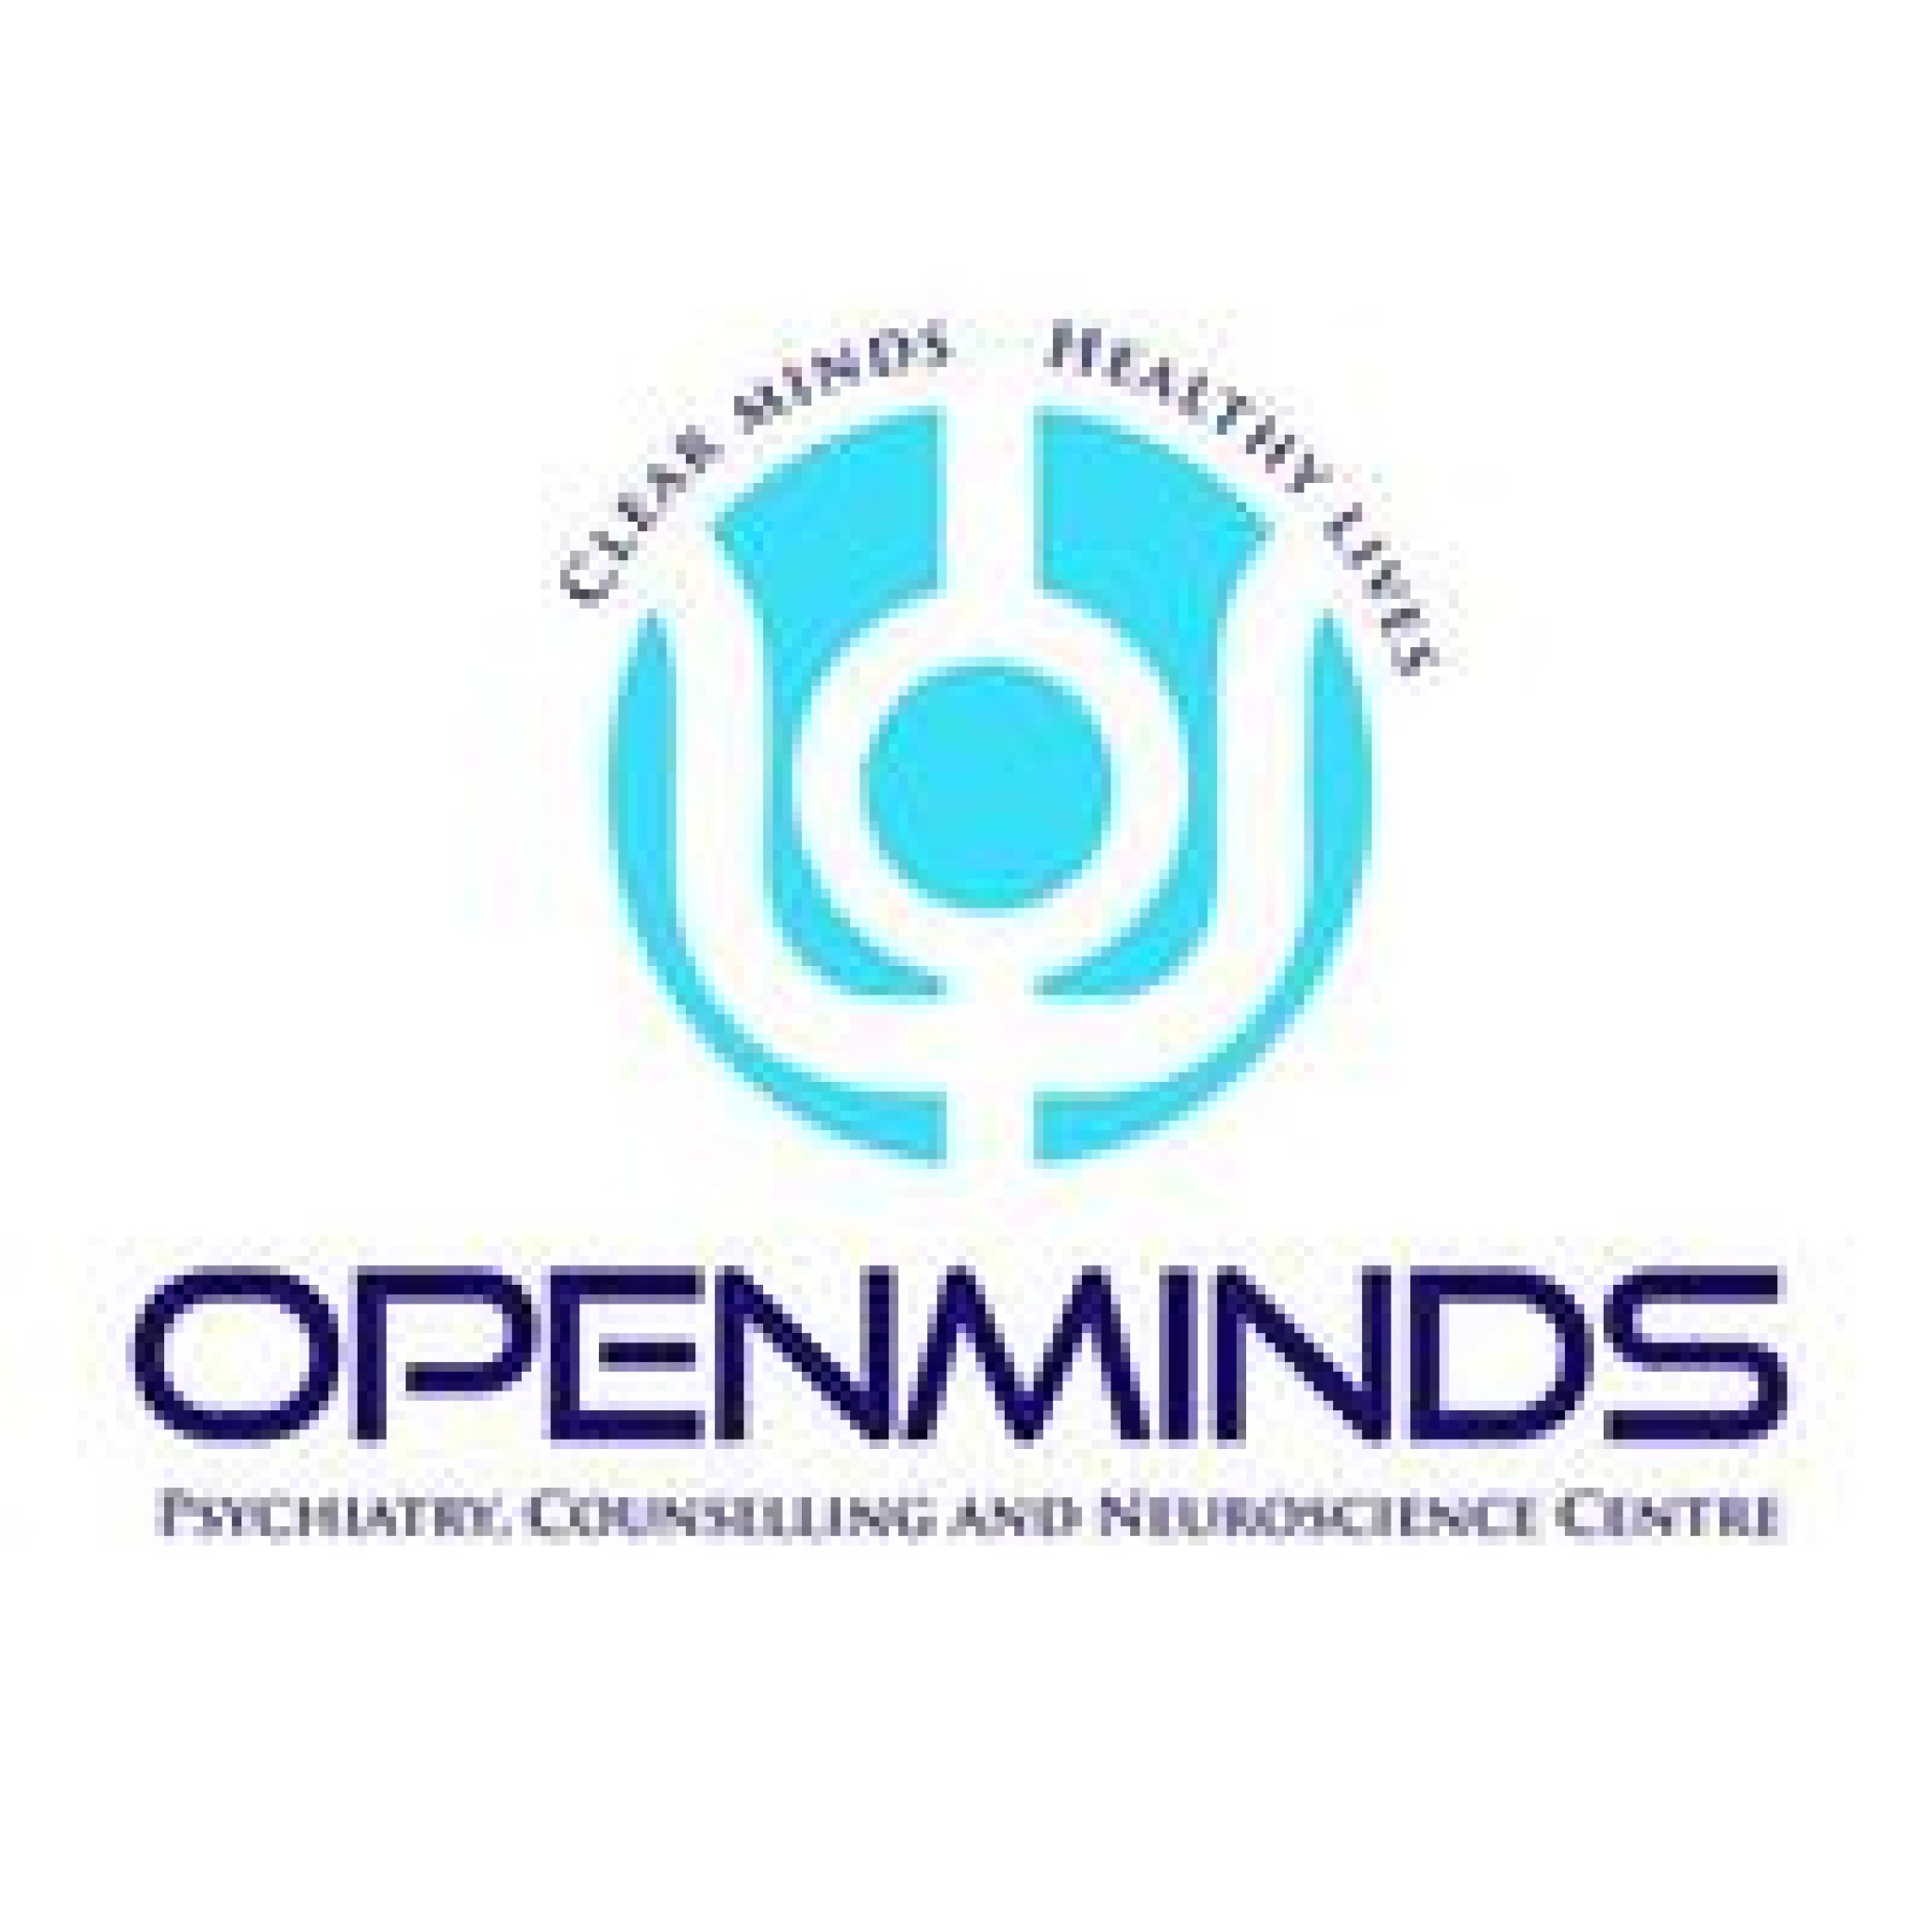 Open Minds Psychiatry Counselling And Neuroscience Centre